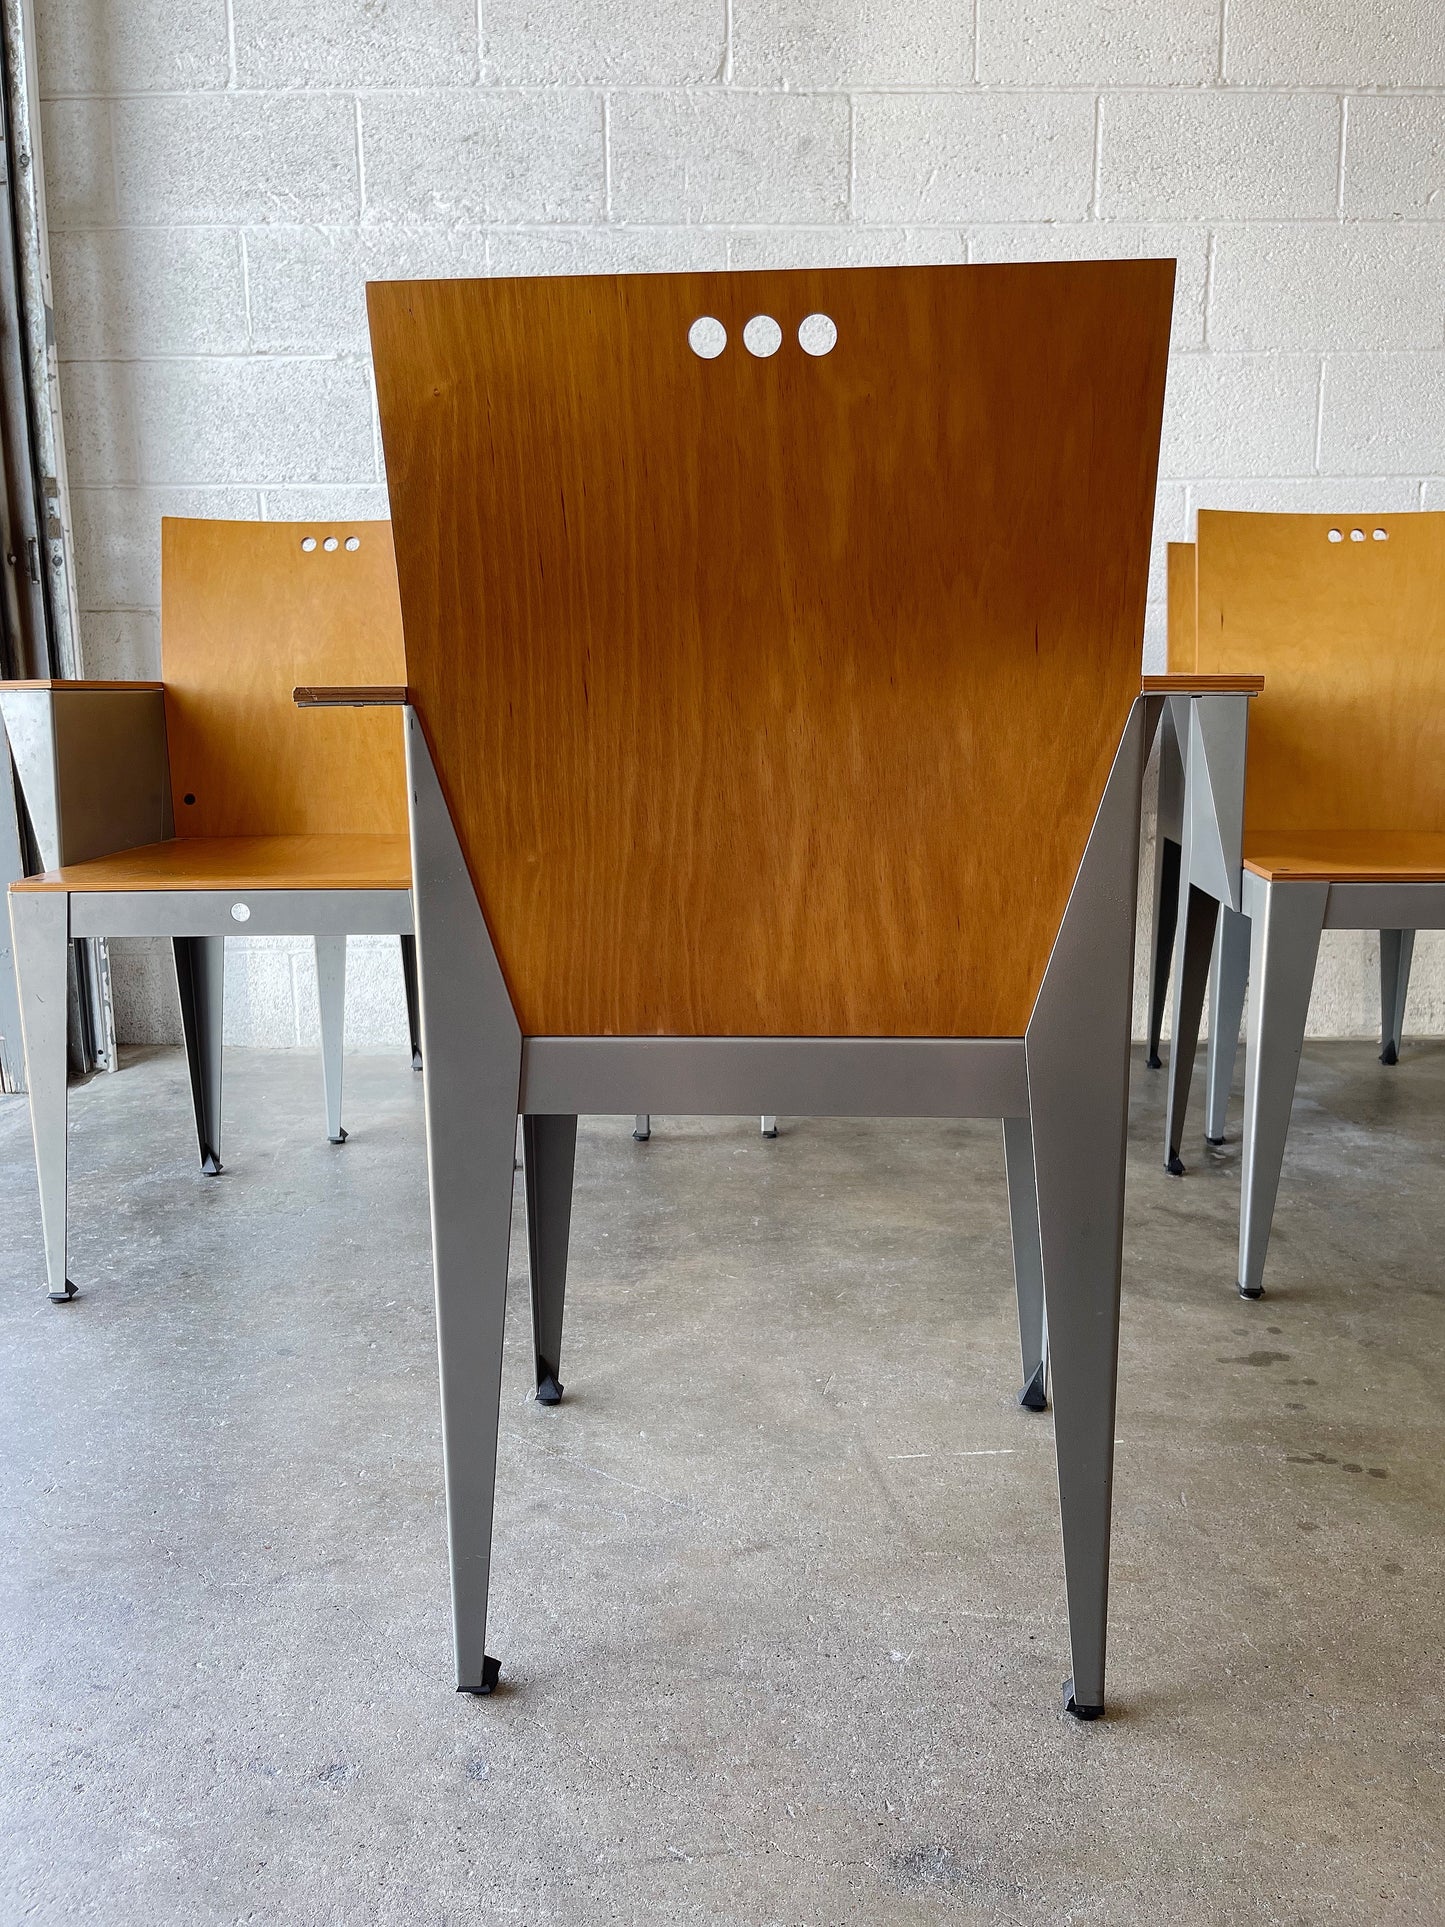 “Eli” Chair by Bruce Sienkowski for Charlotte - Maple & Steel Dining Chairs